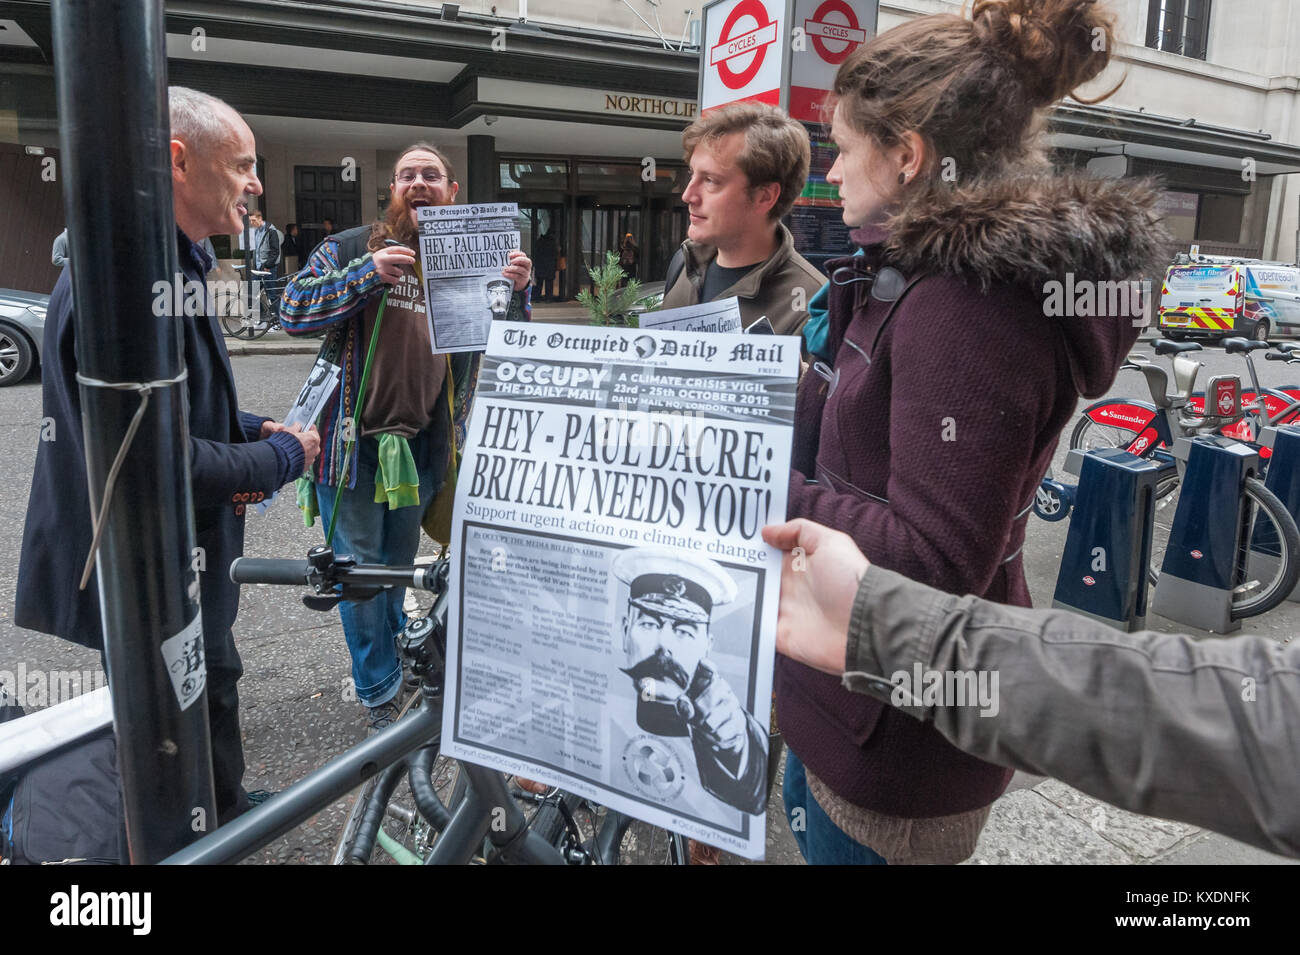 Donnachadh McCarthy and others with copies of 'The Occupied Daily Mail' at  48 hour protest by Occupy to persuade the Daily Mail to end support for fossil fuels and climate deniers and promote policies which mitigate climate change. Stock Photo